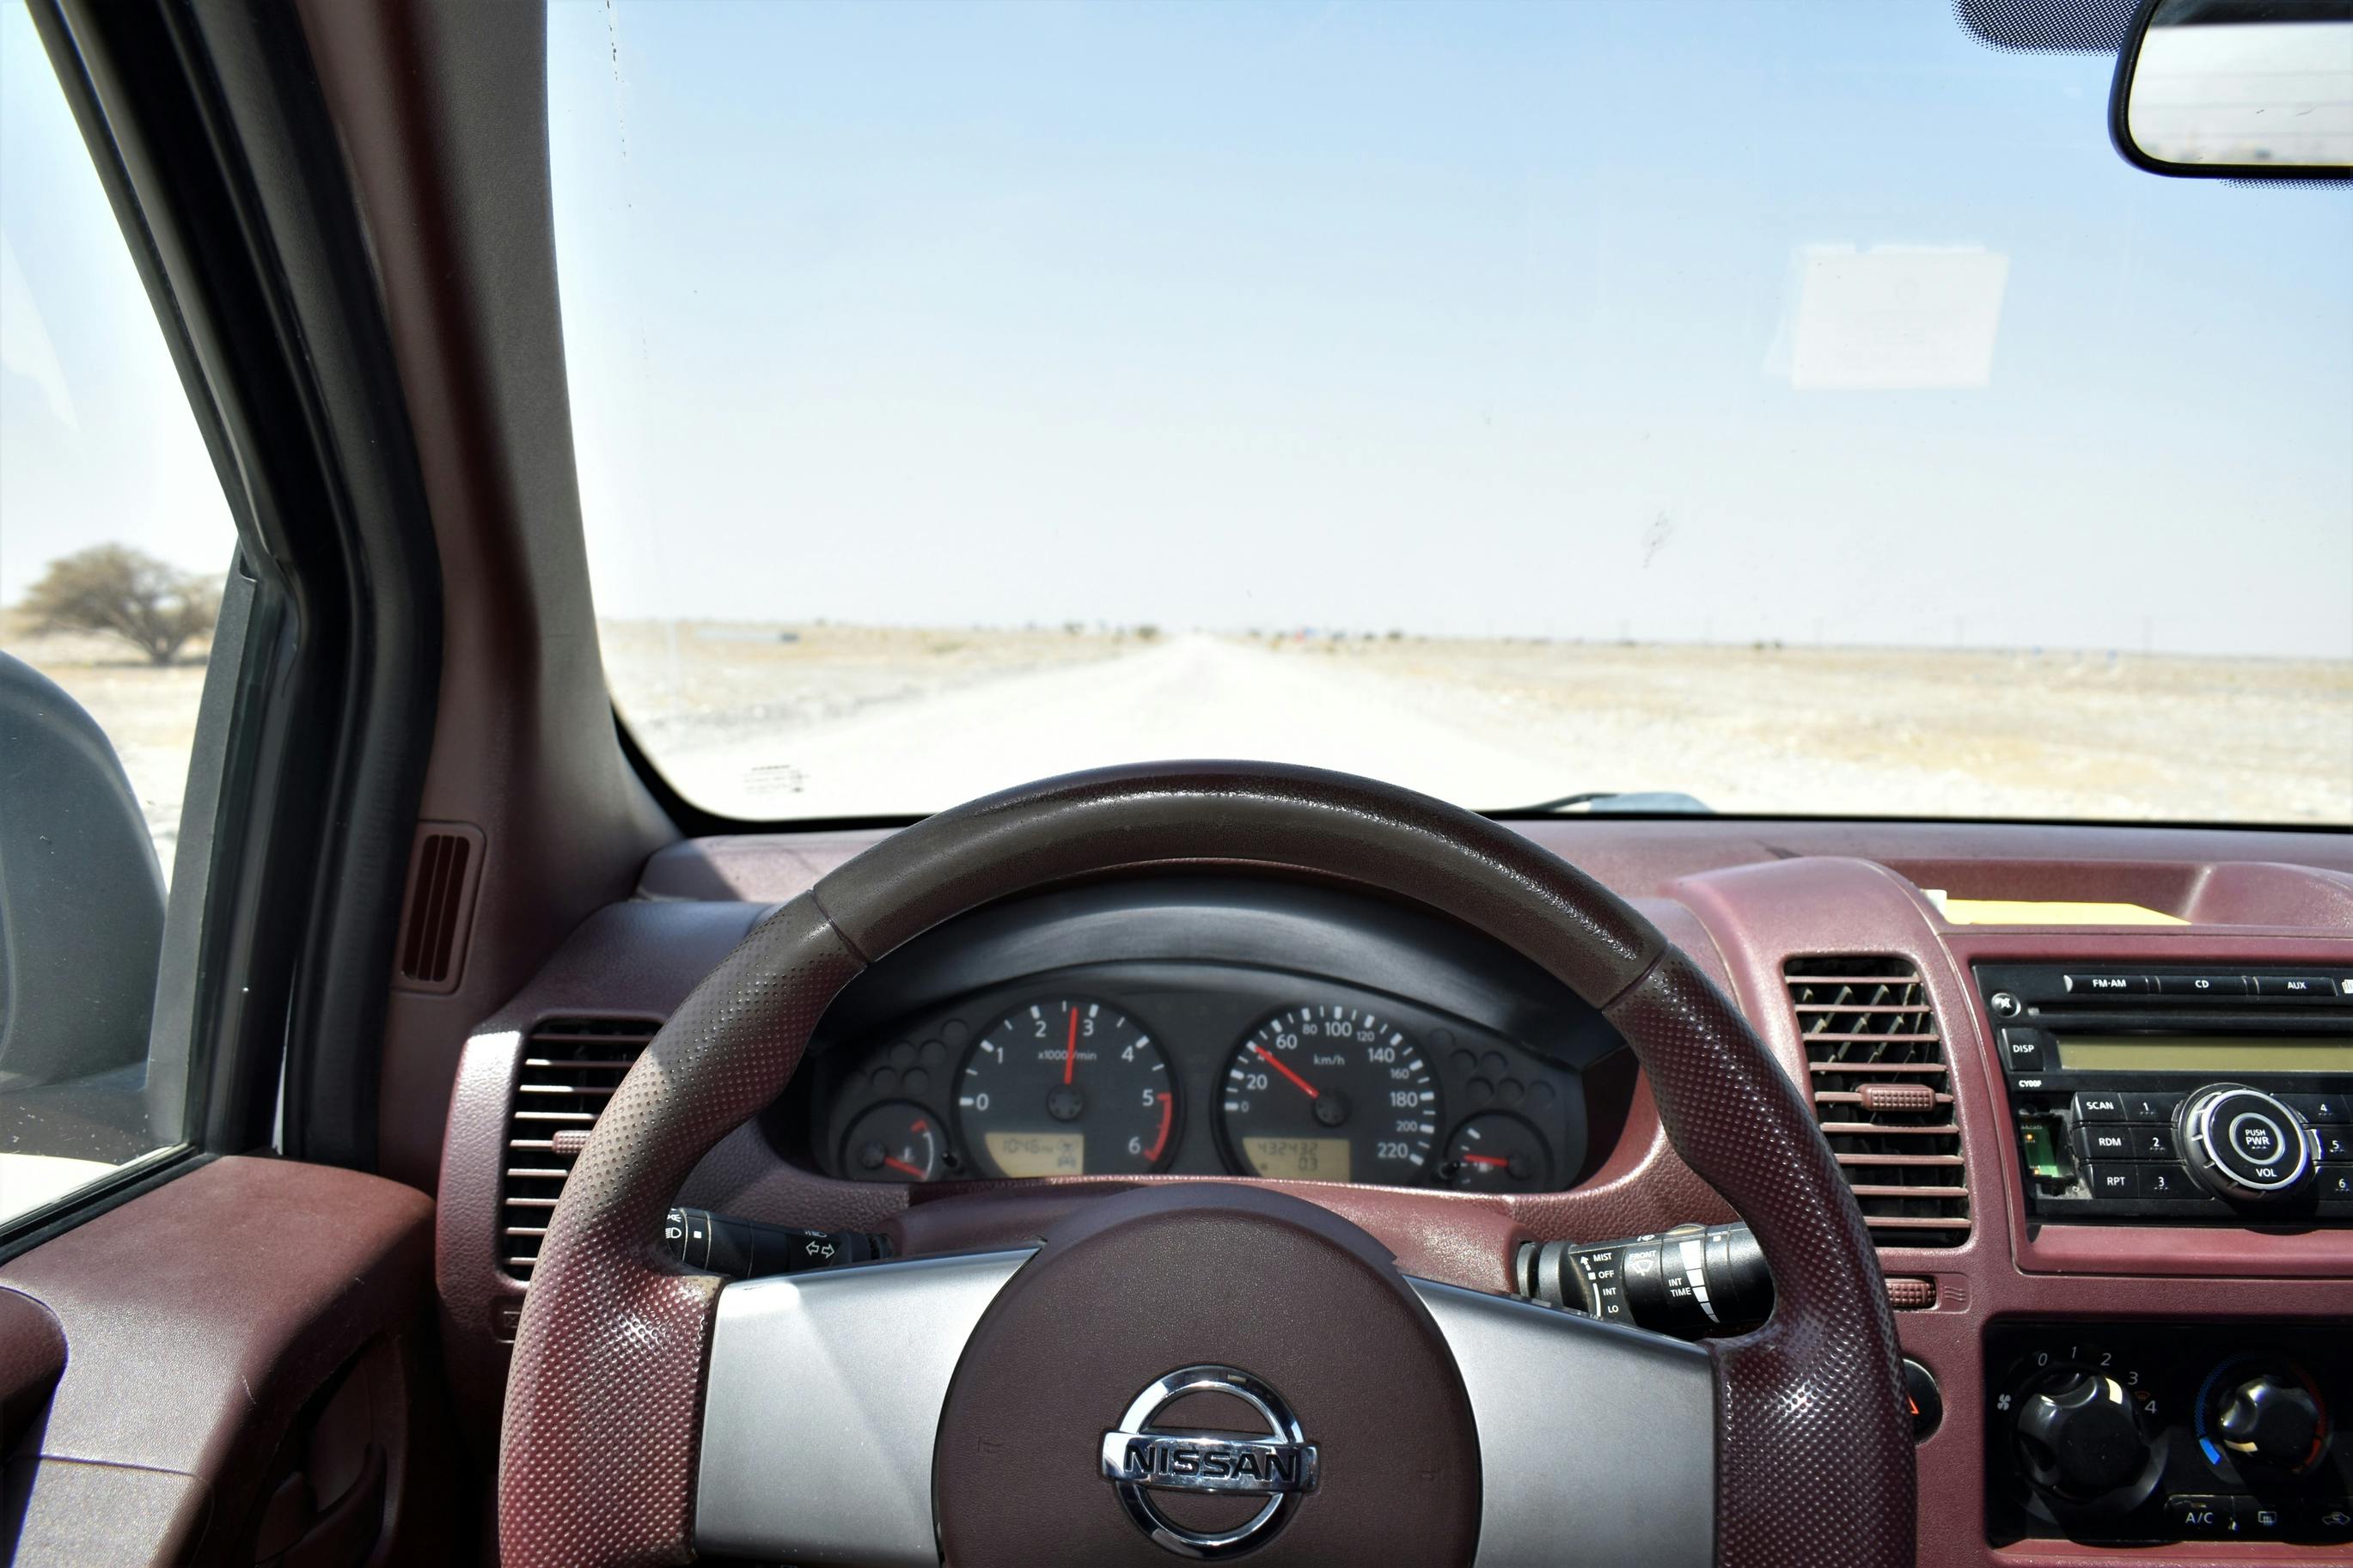 nissan steering wheel, along with the airbag emblem that's affected by a recall